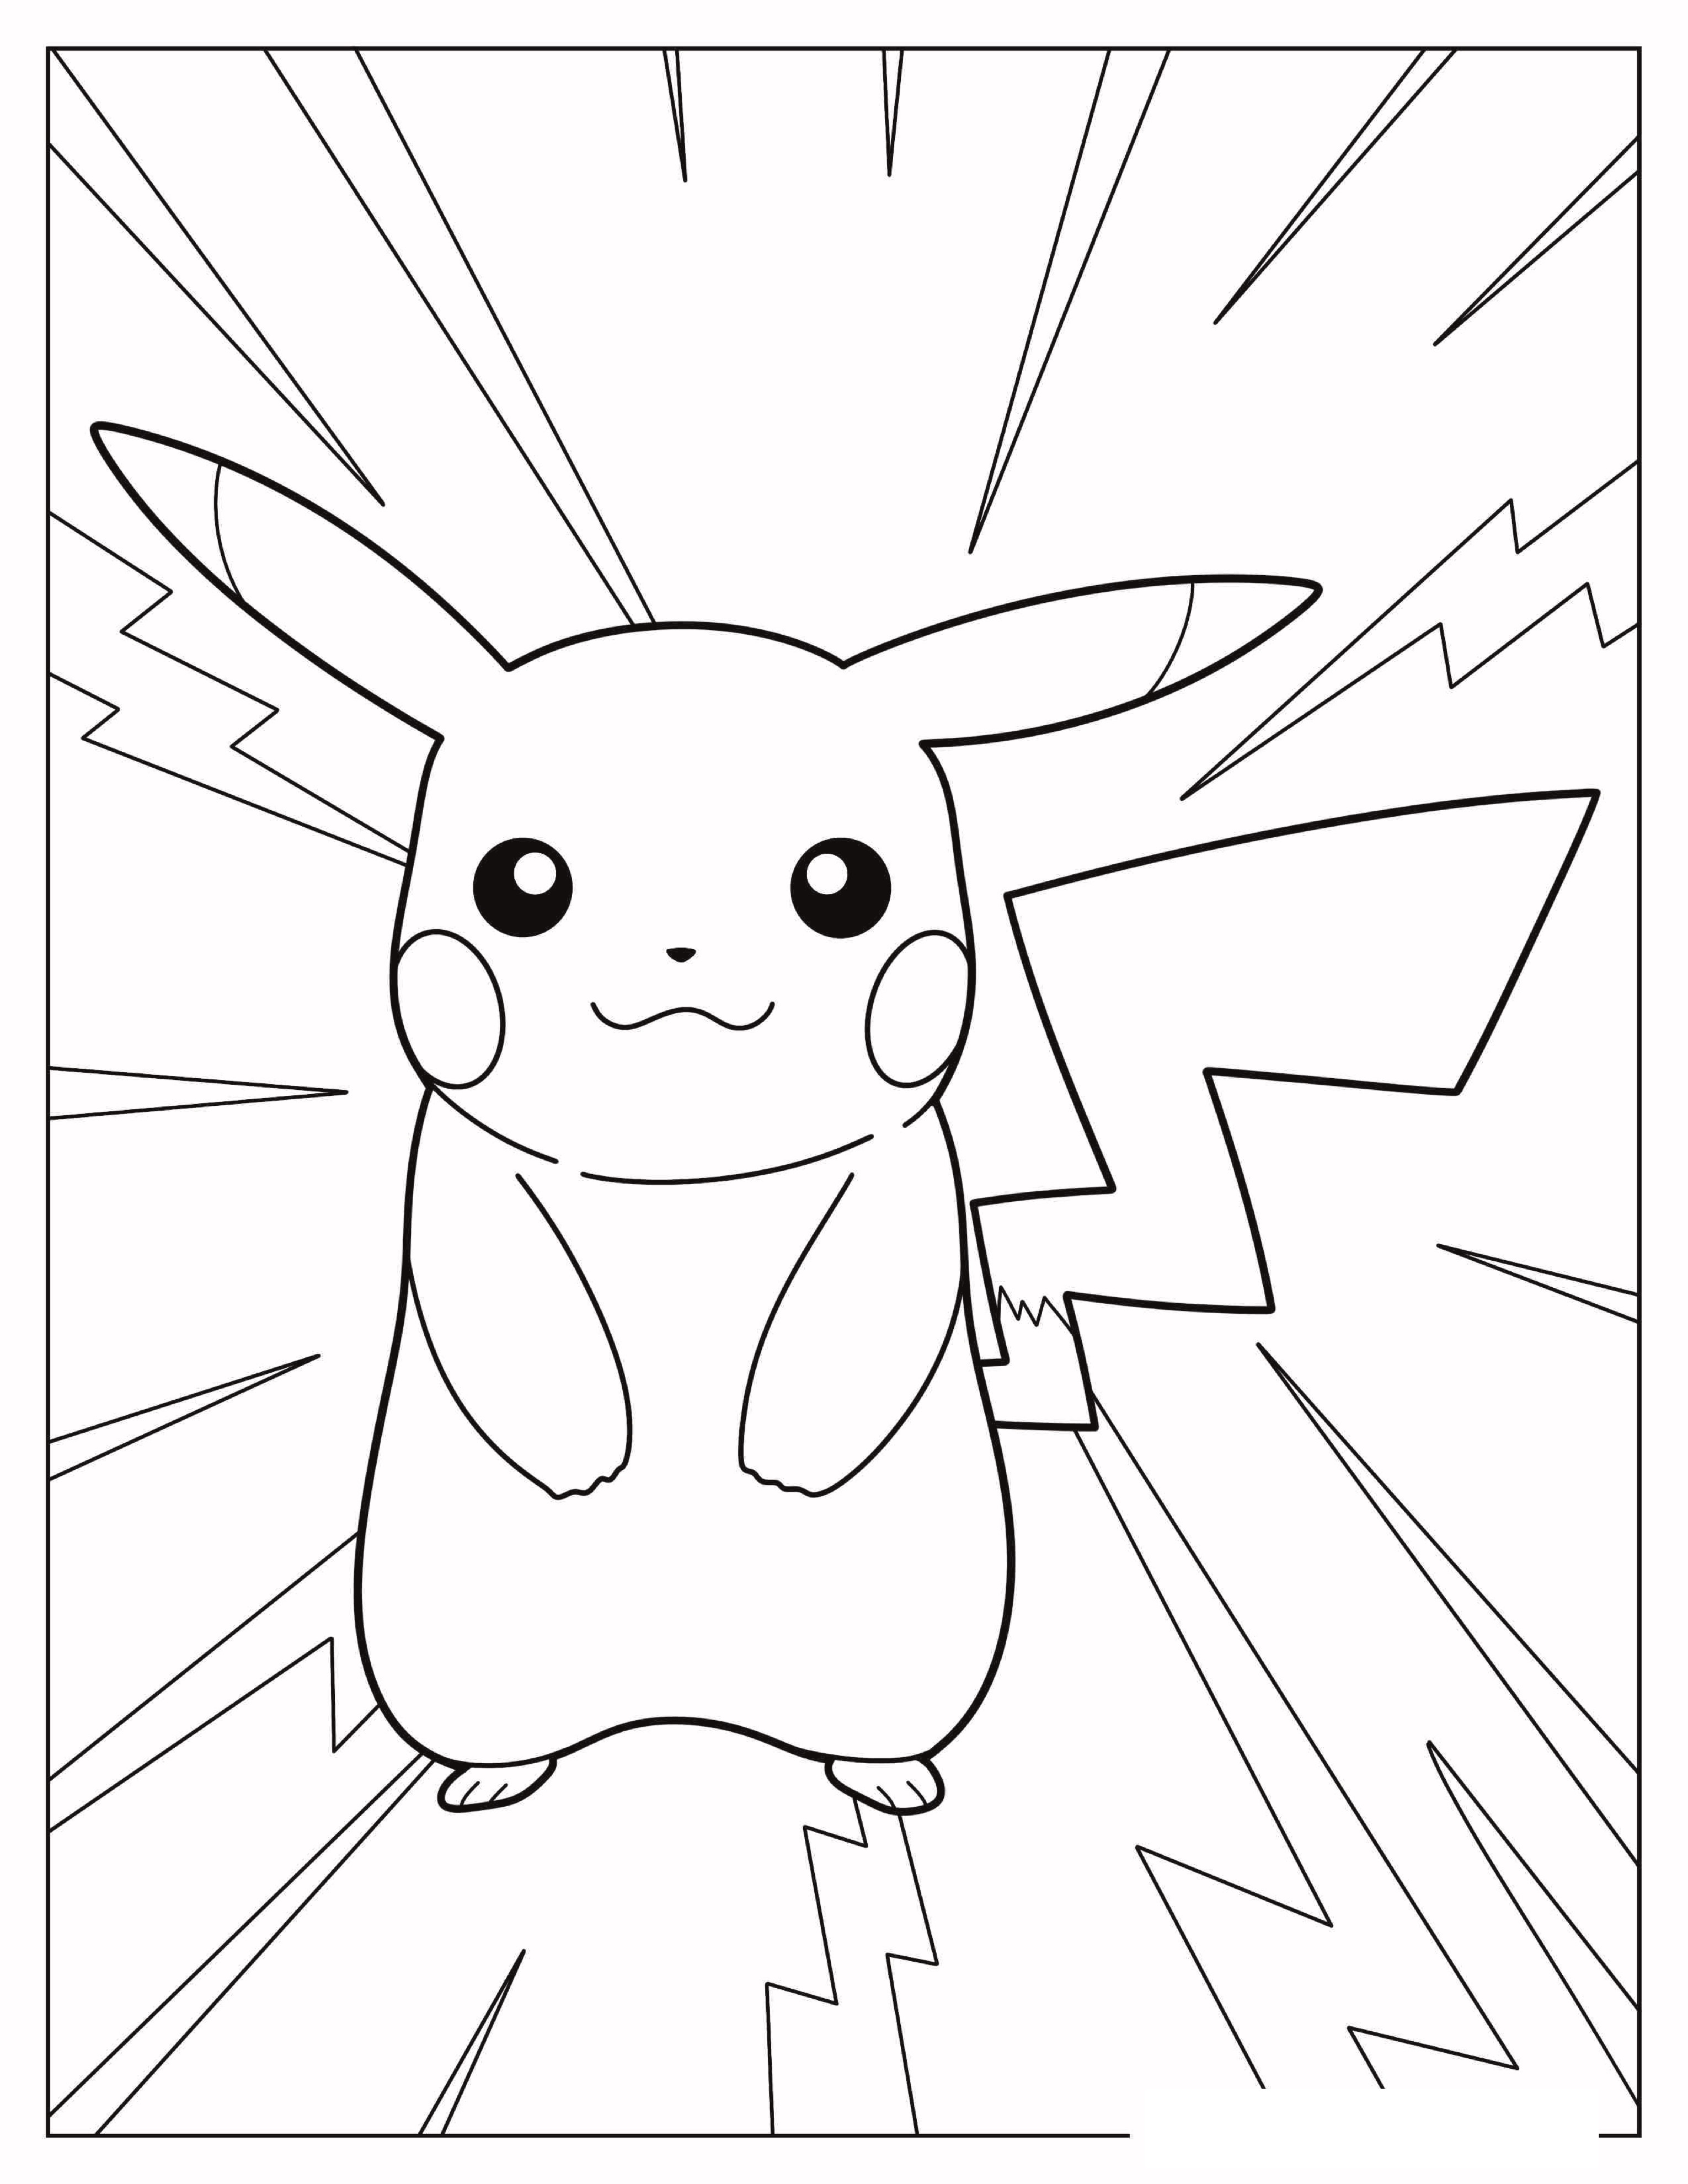 Easy-Pikachu-With-Electricity-Coloring-Page.jpg